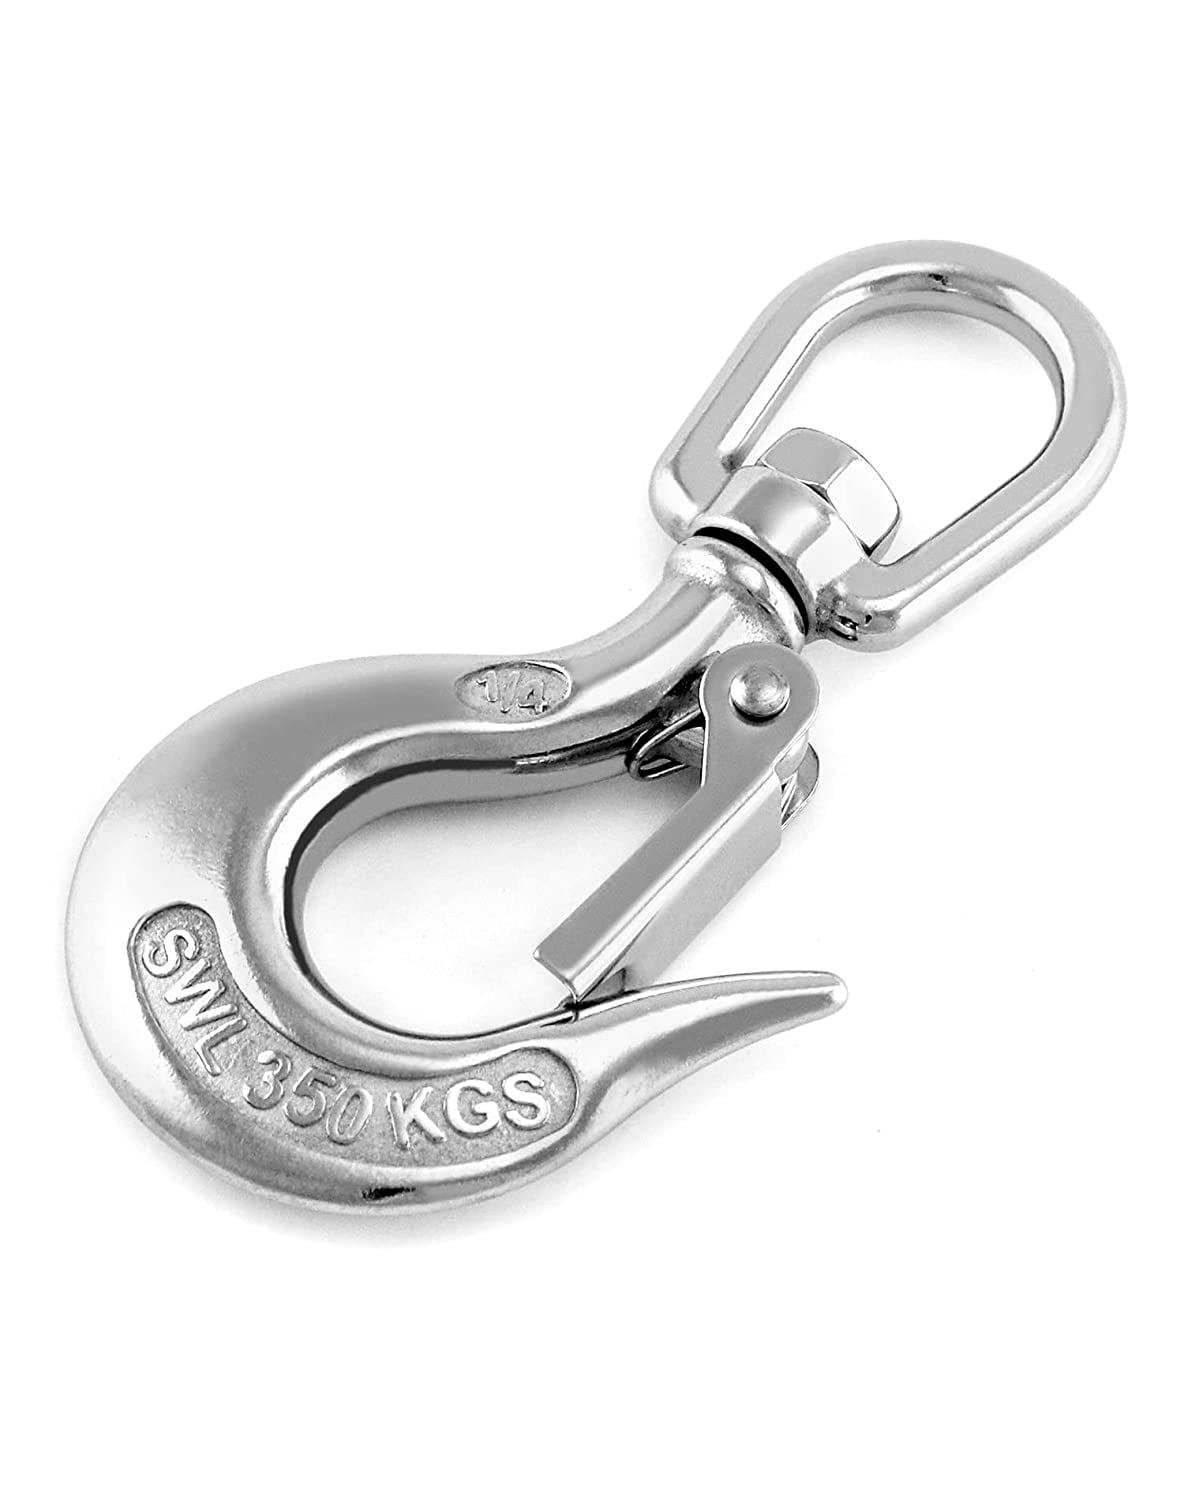 Rotate 360 Degrees Clevis Slip Hook 304 Stainless Steel Swivel Lifting Chain Hook with Safety Latch 1433 Lb Capacity（2 PCS） 